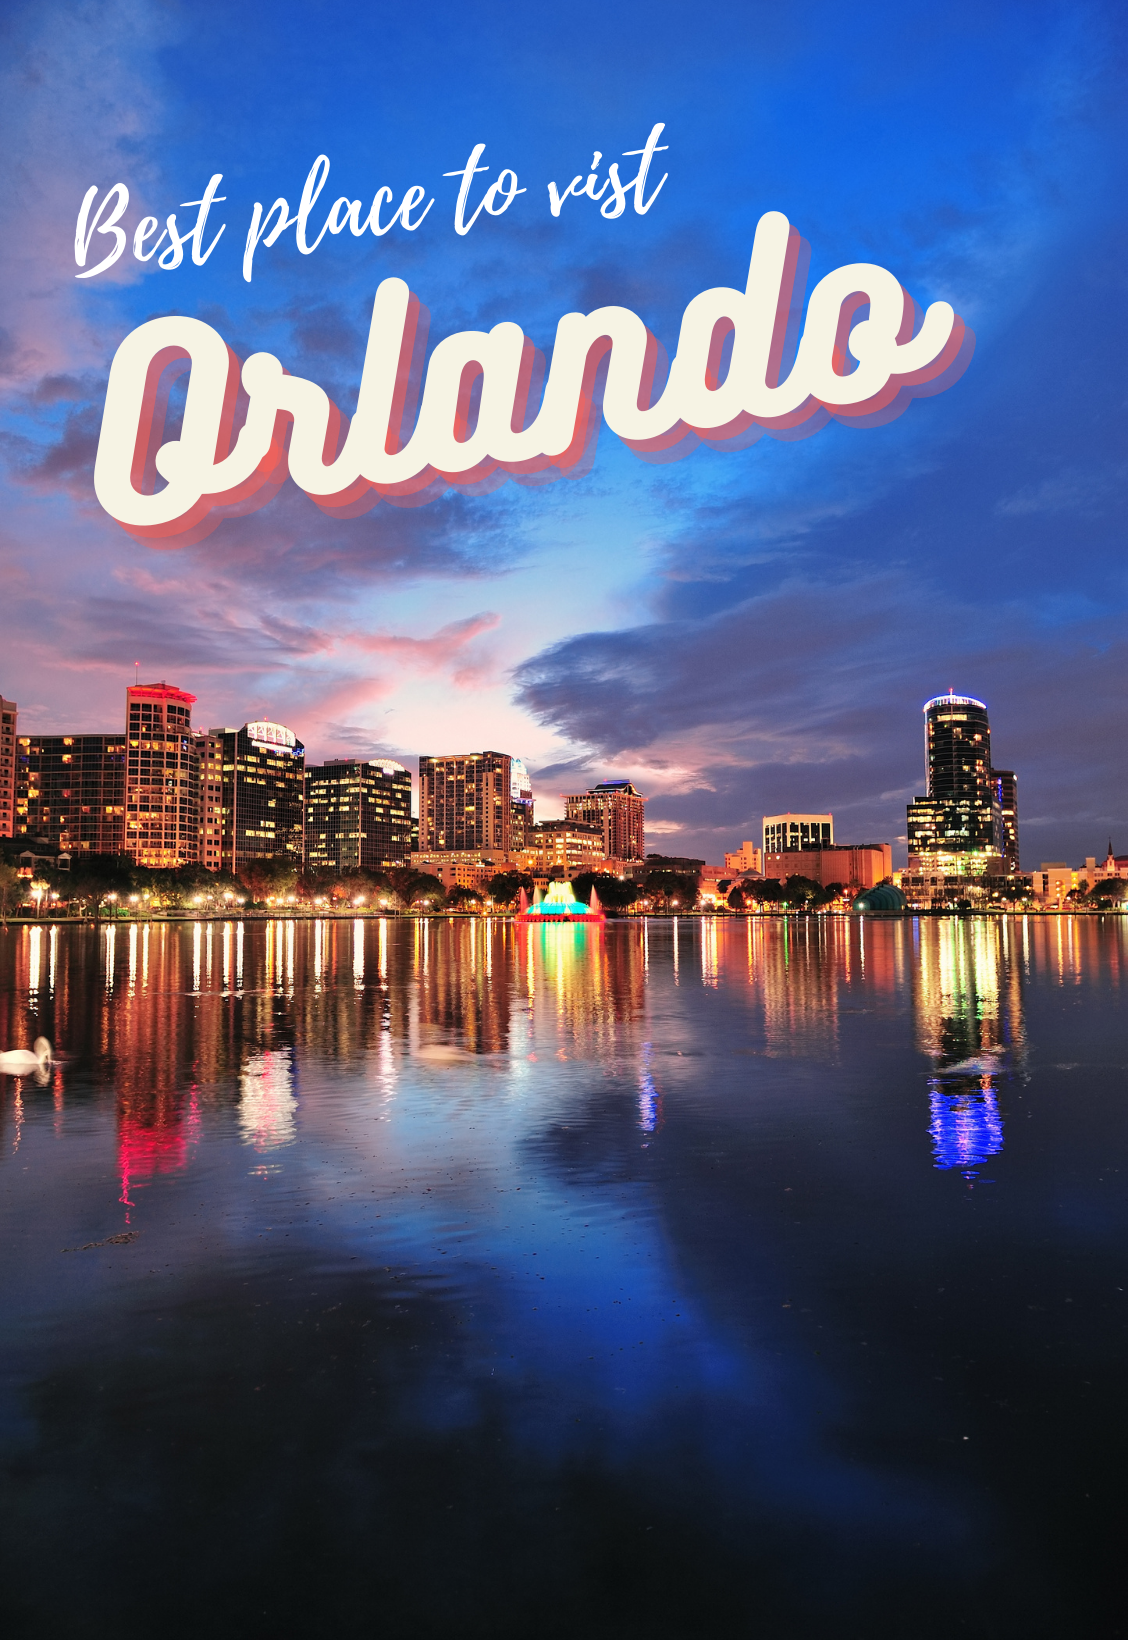 Best places to visit in Orlando 